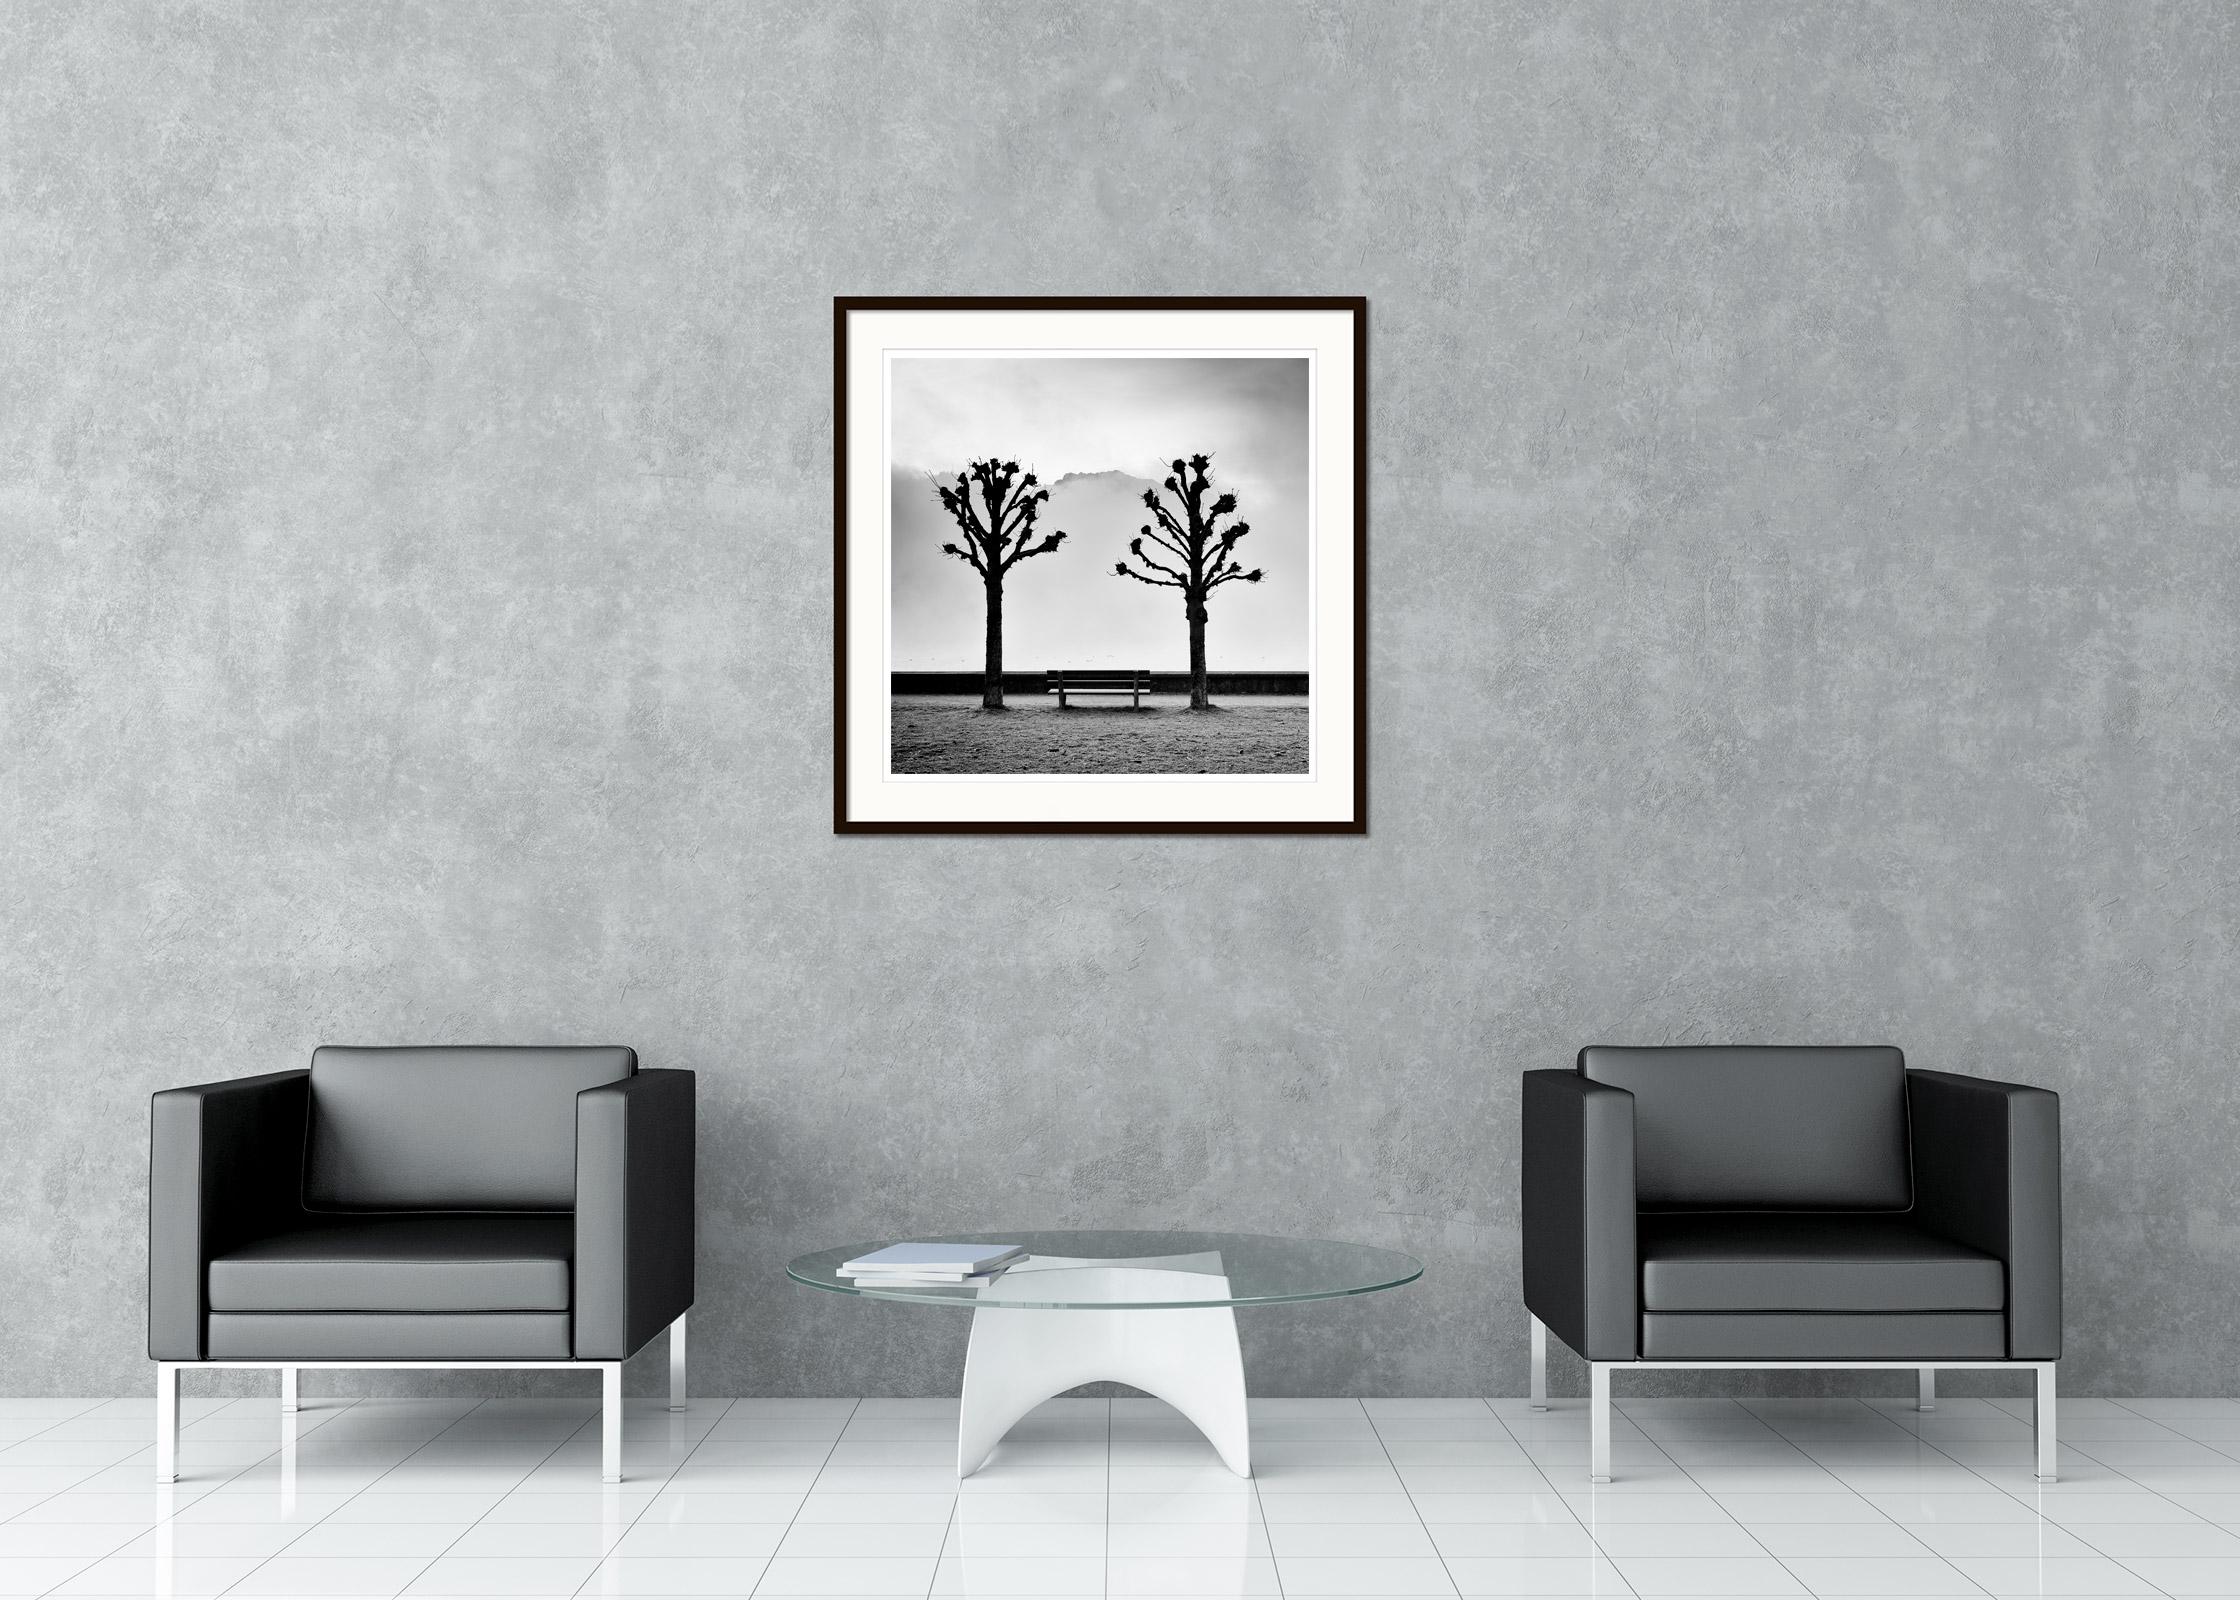 Black and white fine art long exposure waterscape - landscape photography. Chesternut trees and bench in fog over Lake Traunsee with the mountains in the background, Austria. Archival pigment ink print as part of a limited edition of 9. All Gerald